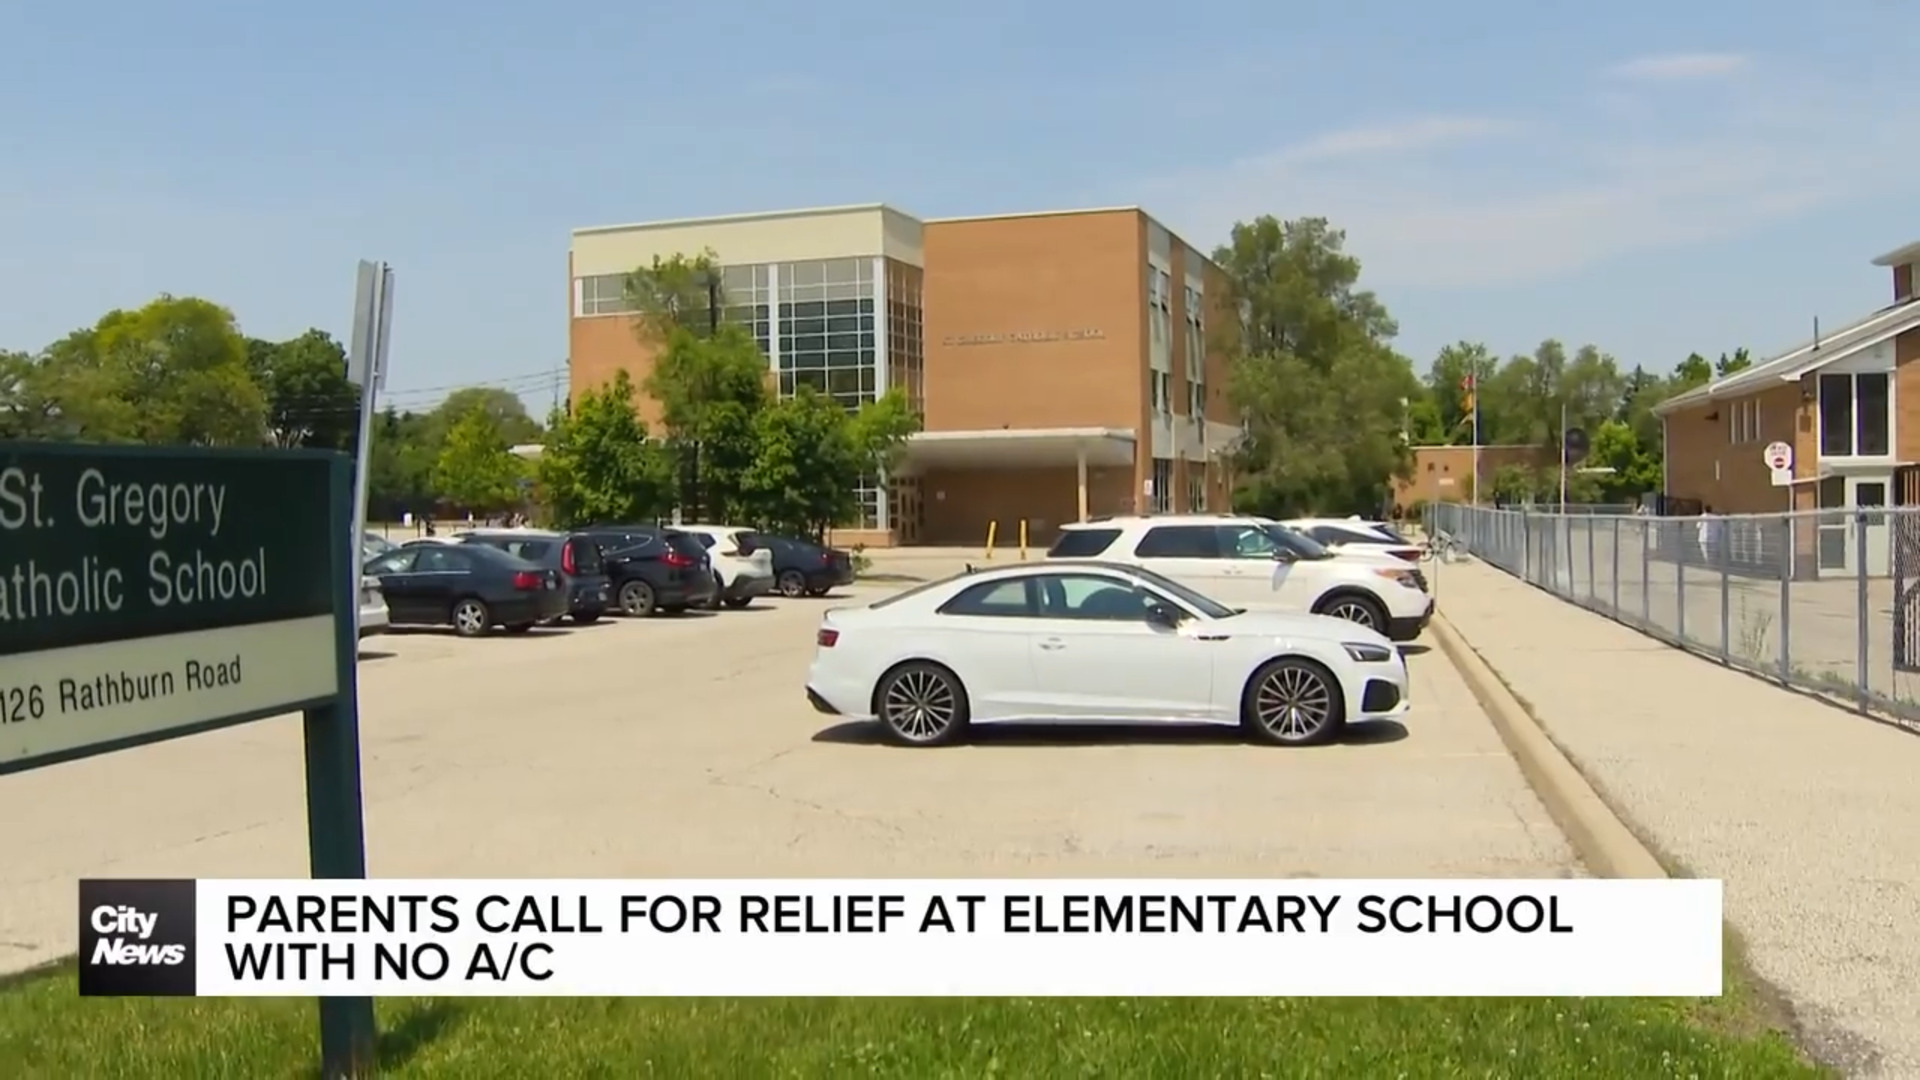 Little relief for students at TCDSB school with no A/C as heat wave grips city